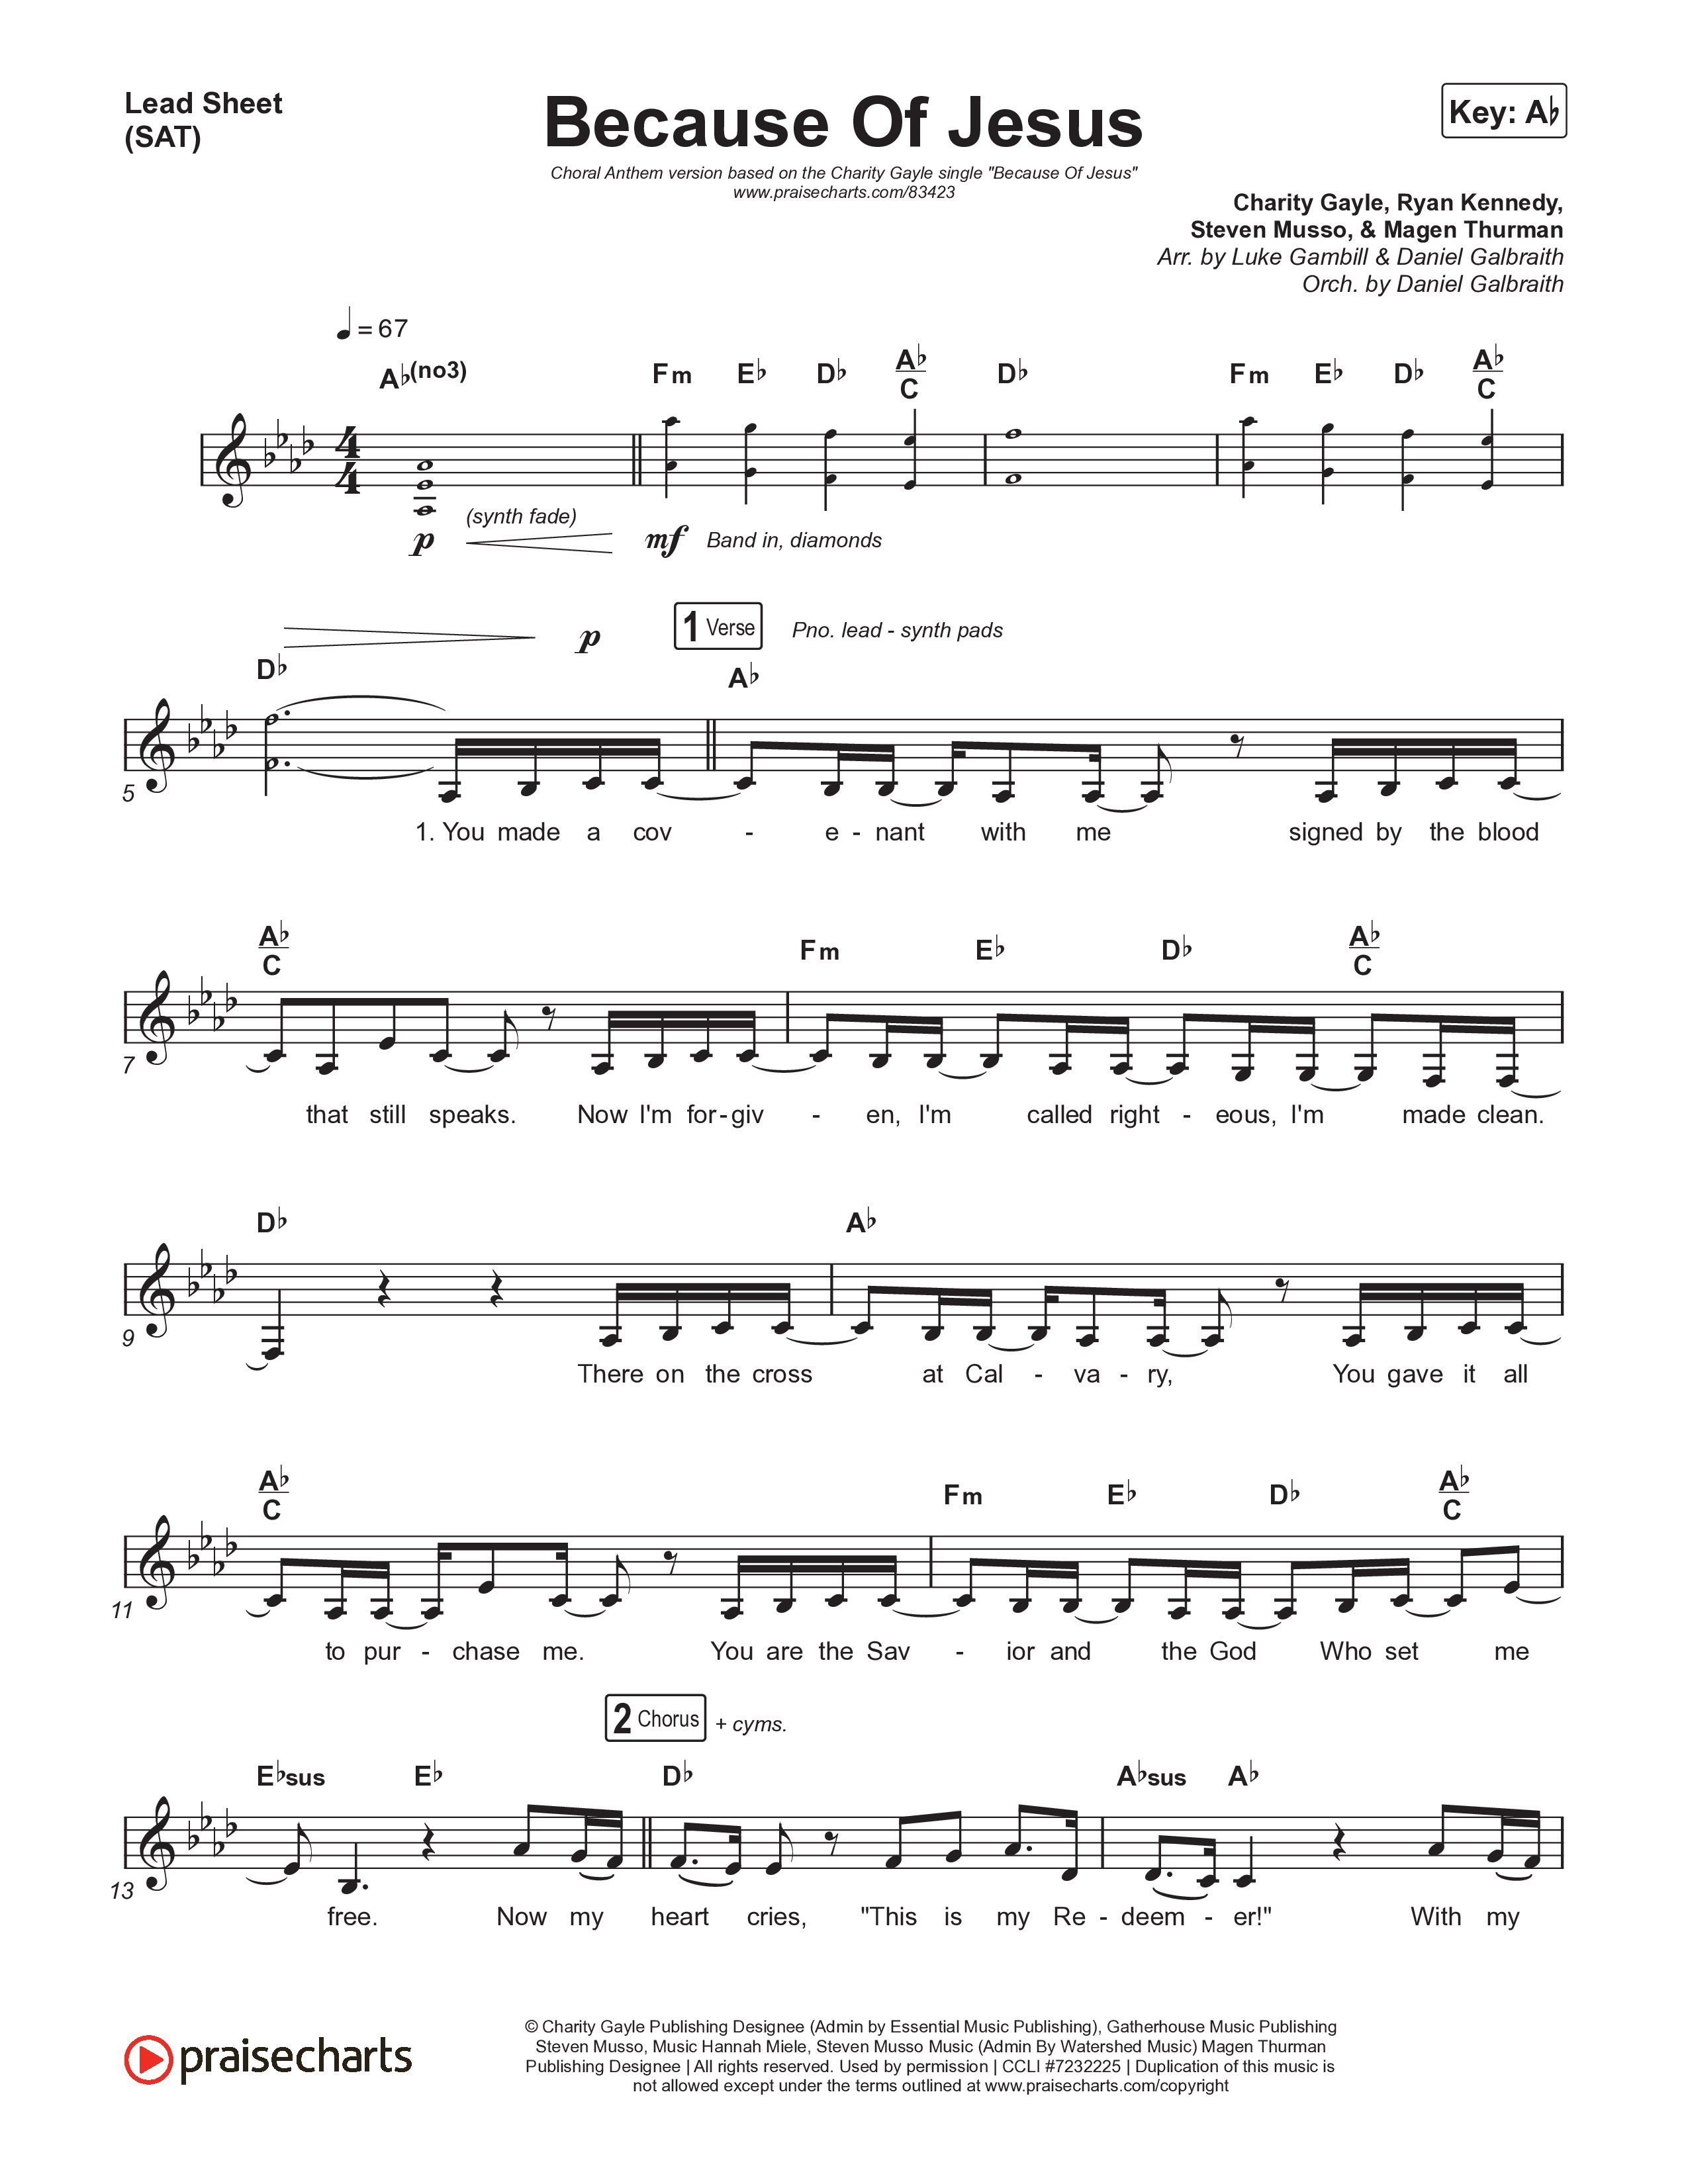 Because Of Jesus (Choral Anthem SATB) Lead Sheet (SAT) (Charity Gayle / Arr. Luke Gambill)